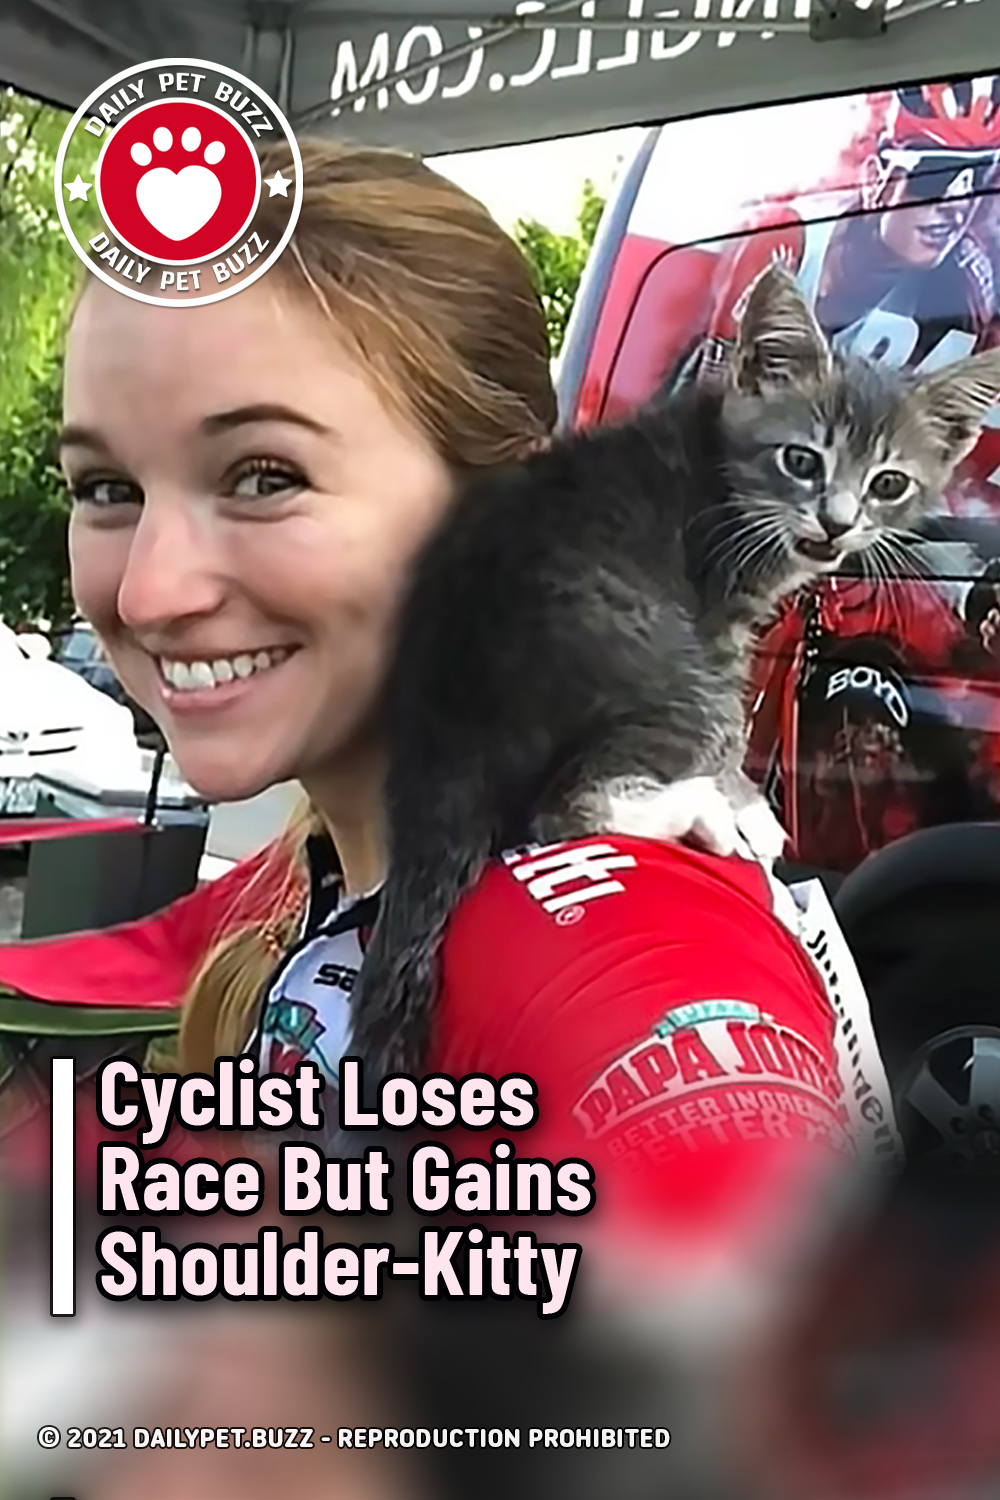 Cyclist Loses Race But Gains Shoulder-Kitty